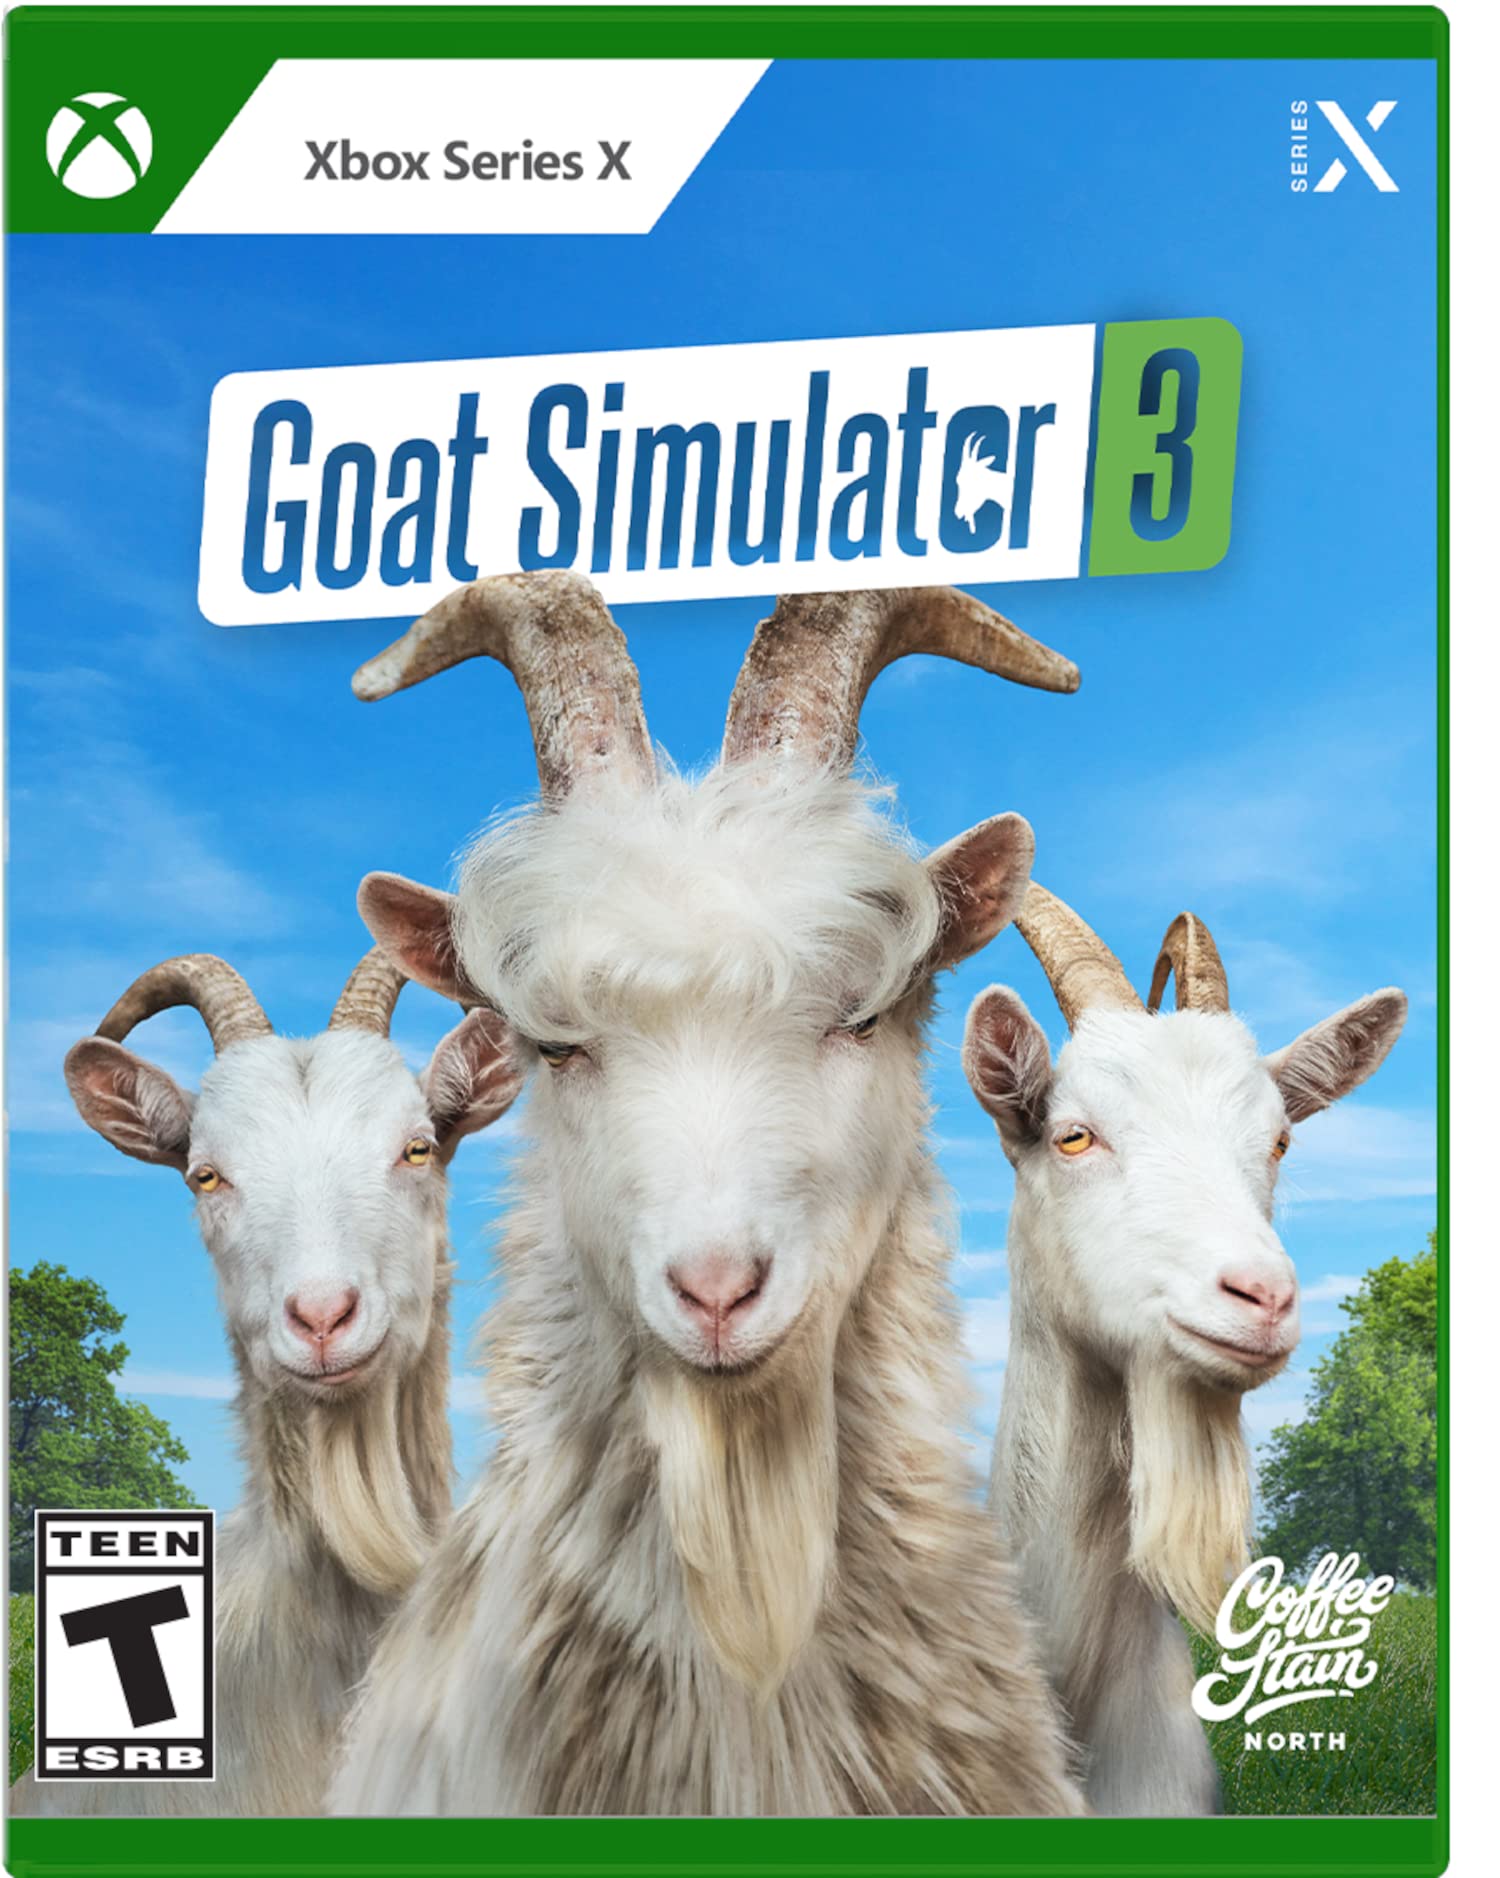 Goat Simulator 3 (Xbox Series X, Physical) $5 + Free Shipping w/ Prime or on $35+